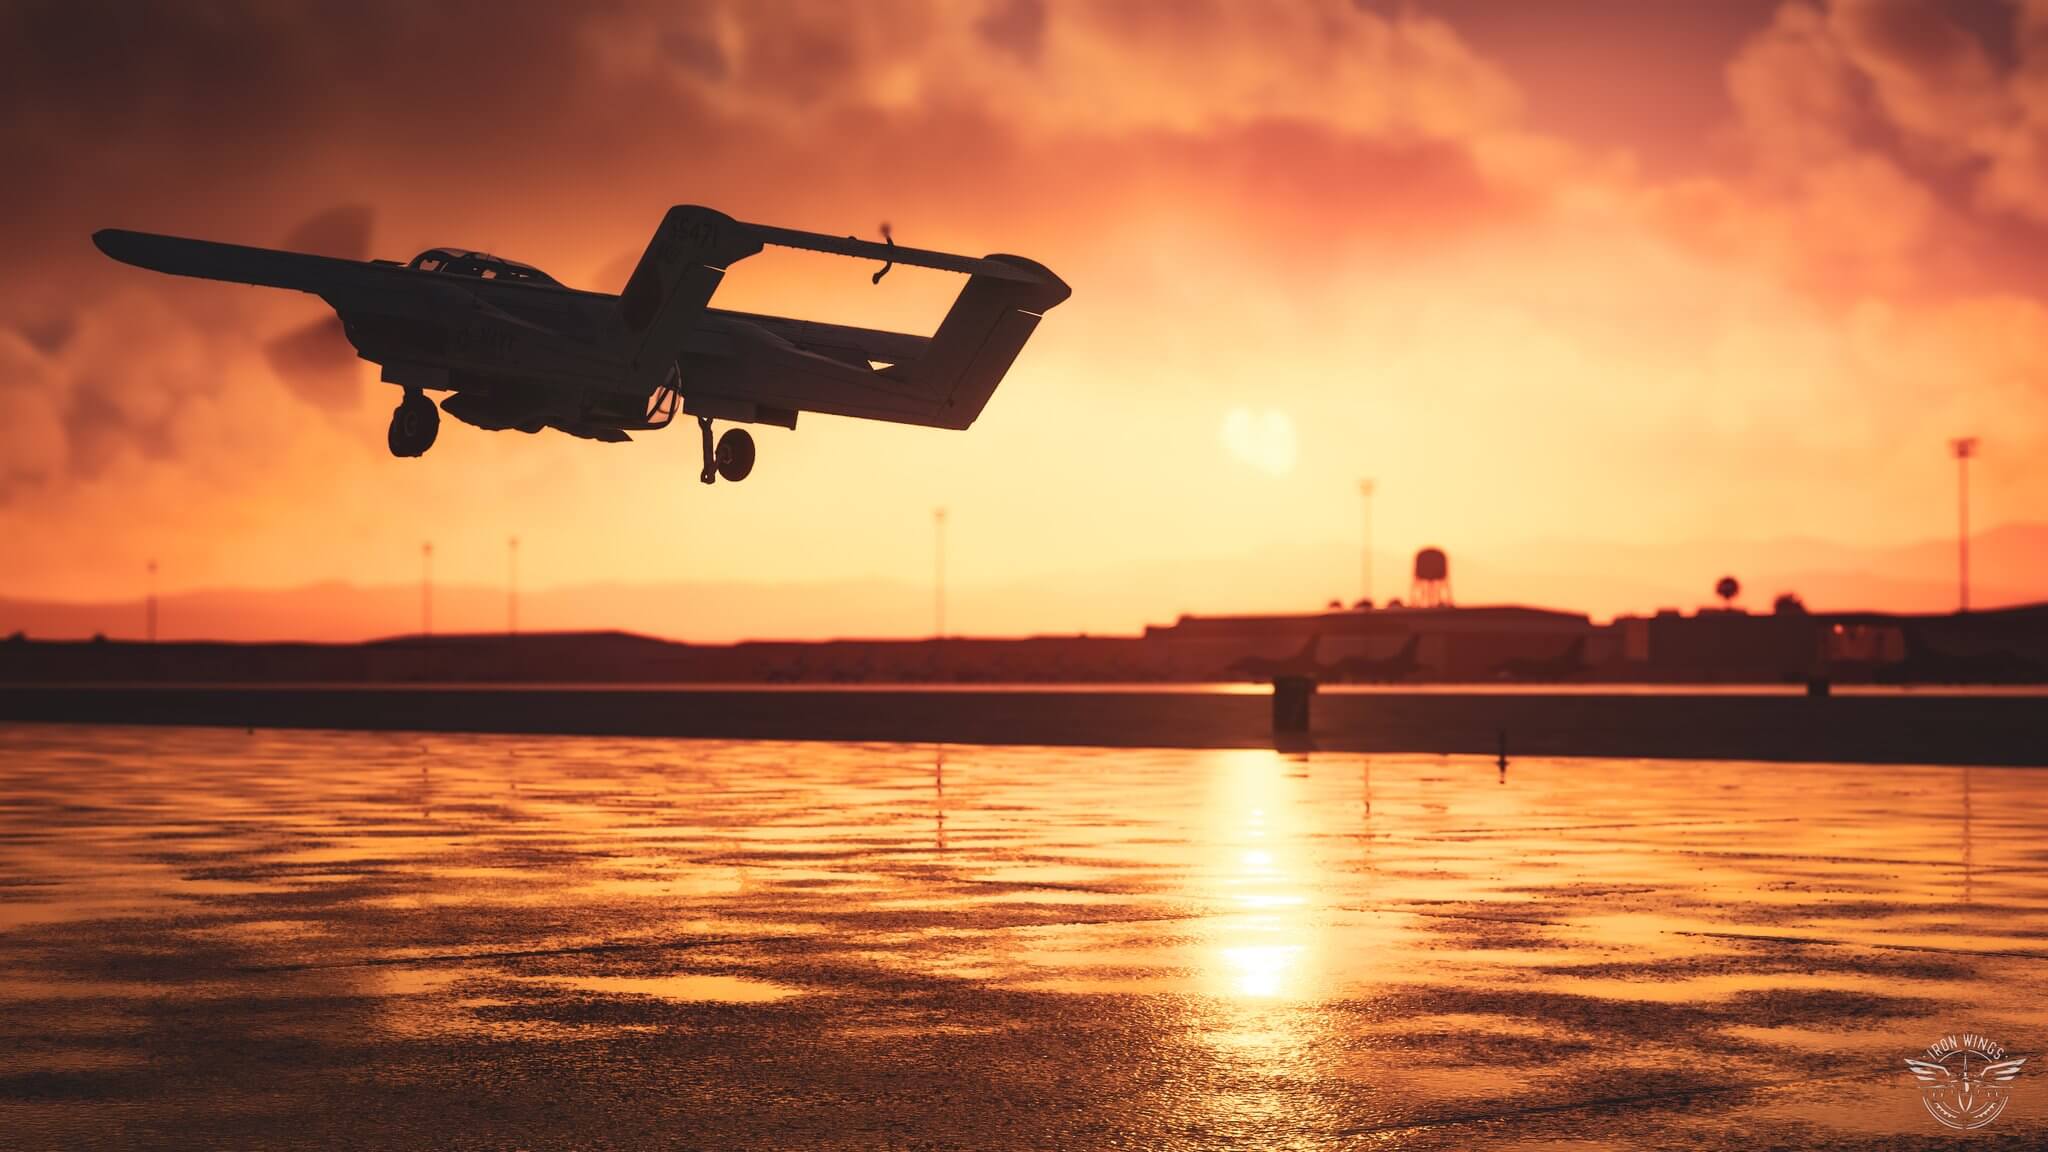 An OV-10 Bronco lifts off from a wet runway during golden hour, with the sun visible in the distance across the airport apron.